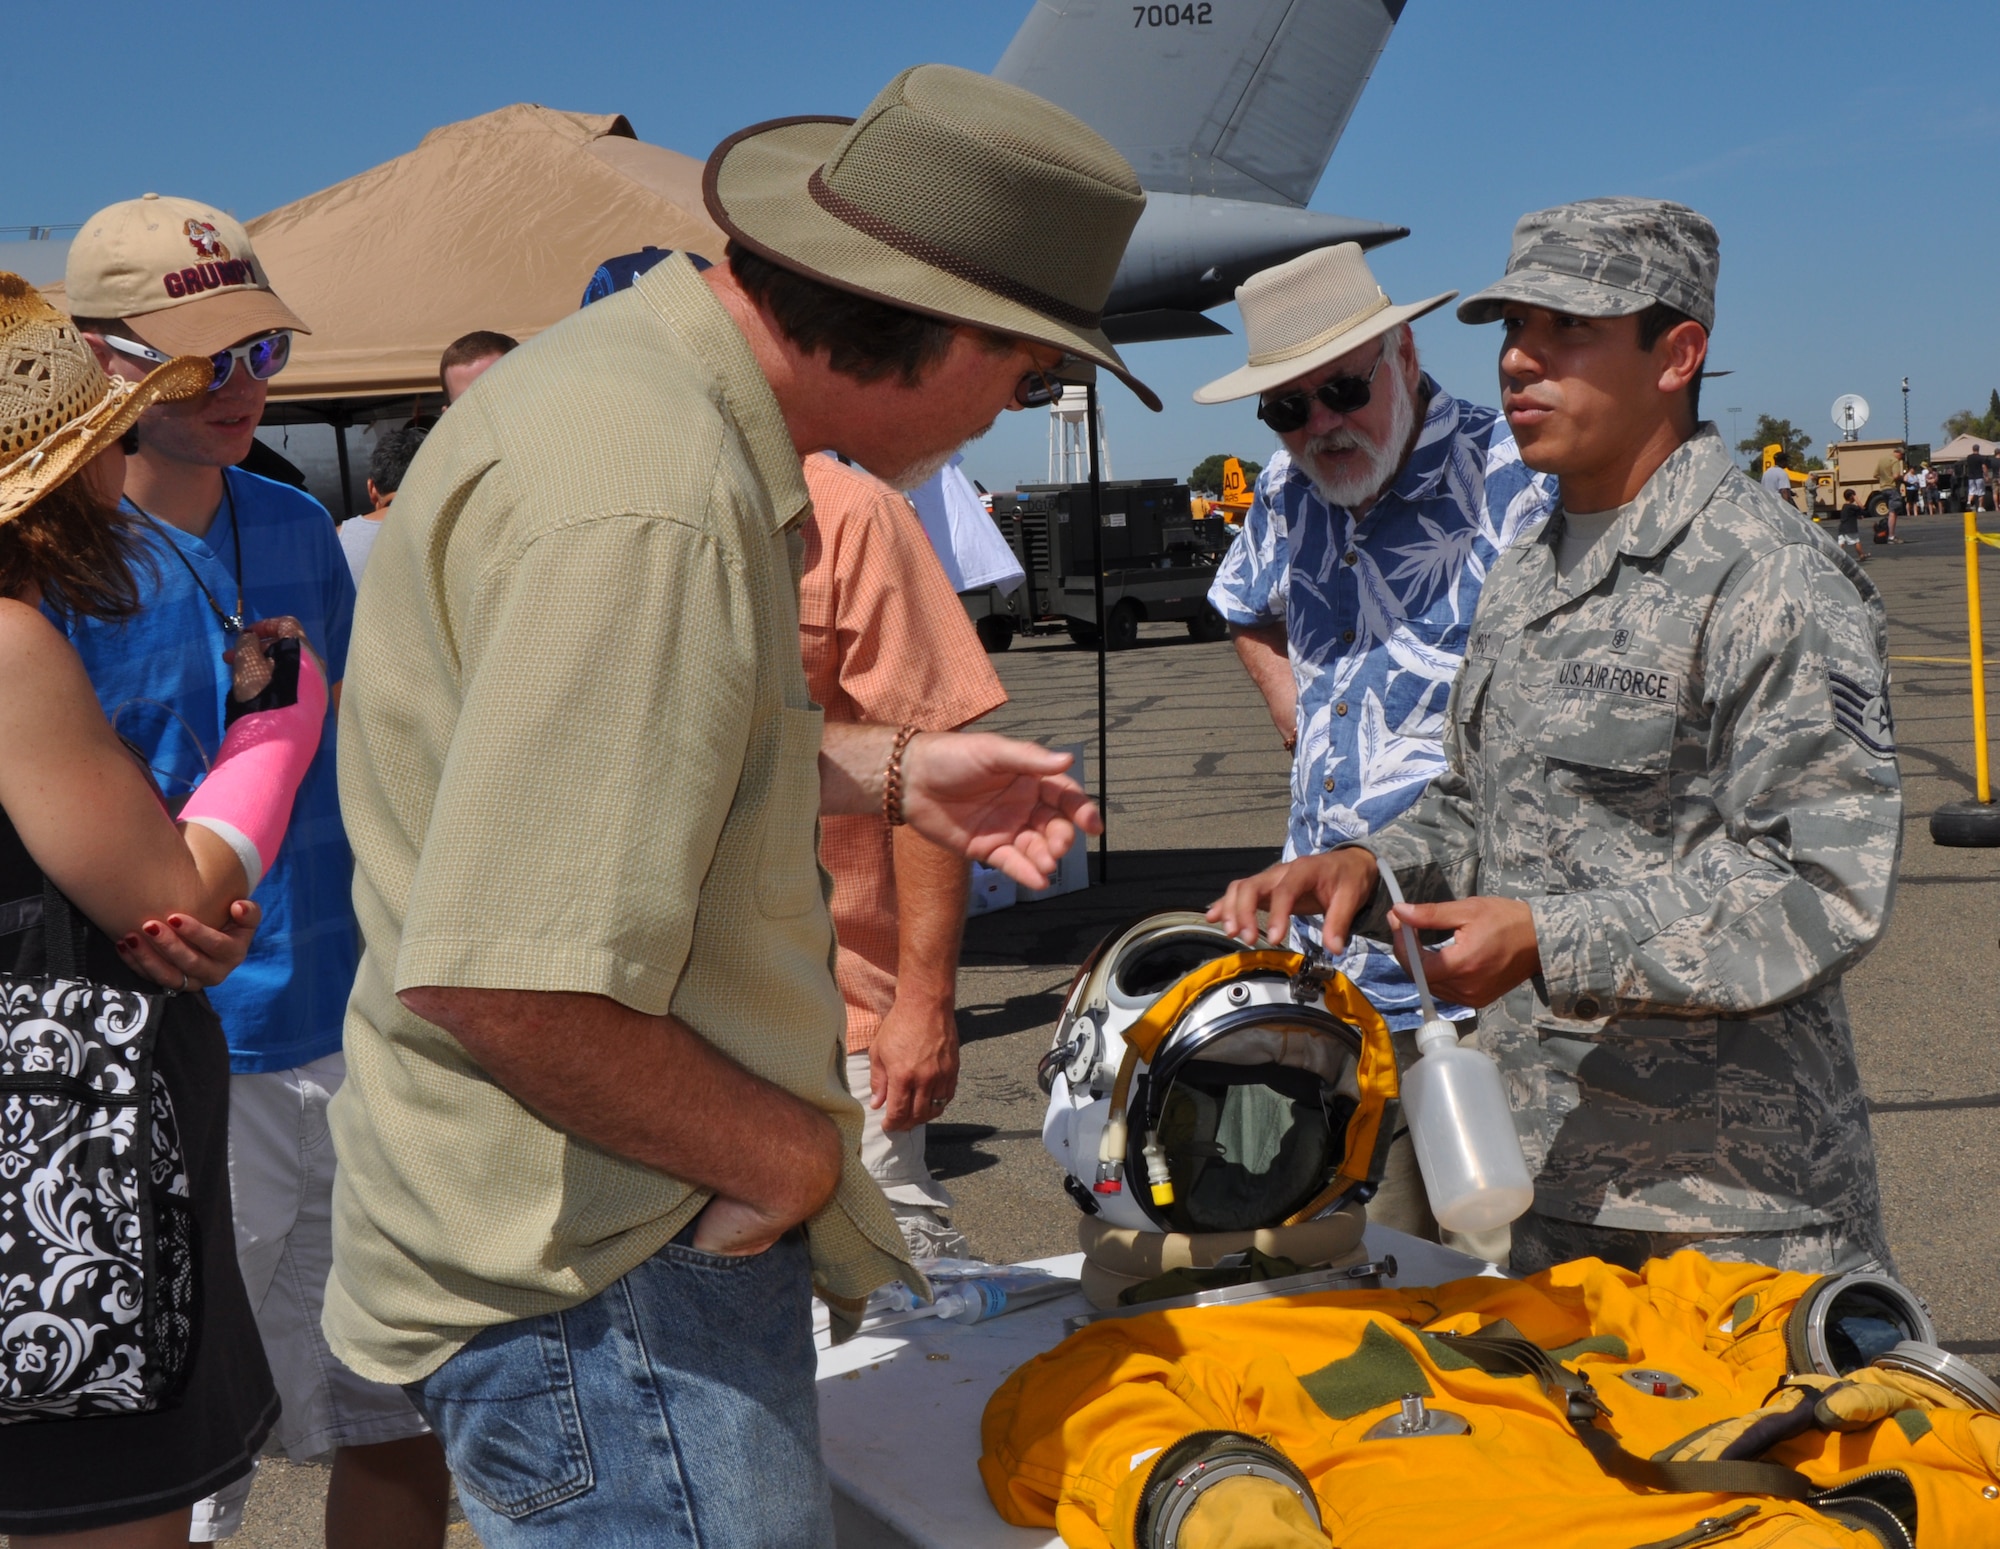 U.S. Air Force Staff Sgt. Willy Campos, 9th Physiological Support Squadron, explains the unique characteristics of the full pressure suits worn by U-2 Intelligence Reconnaissance and Surveillance aircraft pilots at the Capital City Air Show at Mather Airport, Sacramento, Calif., Sept. 8, 2012. The suits are very similar to NASA astronaut suits.  (U.S. Air Force photo by Staff Sgt. Robert M. Trujillo)